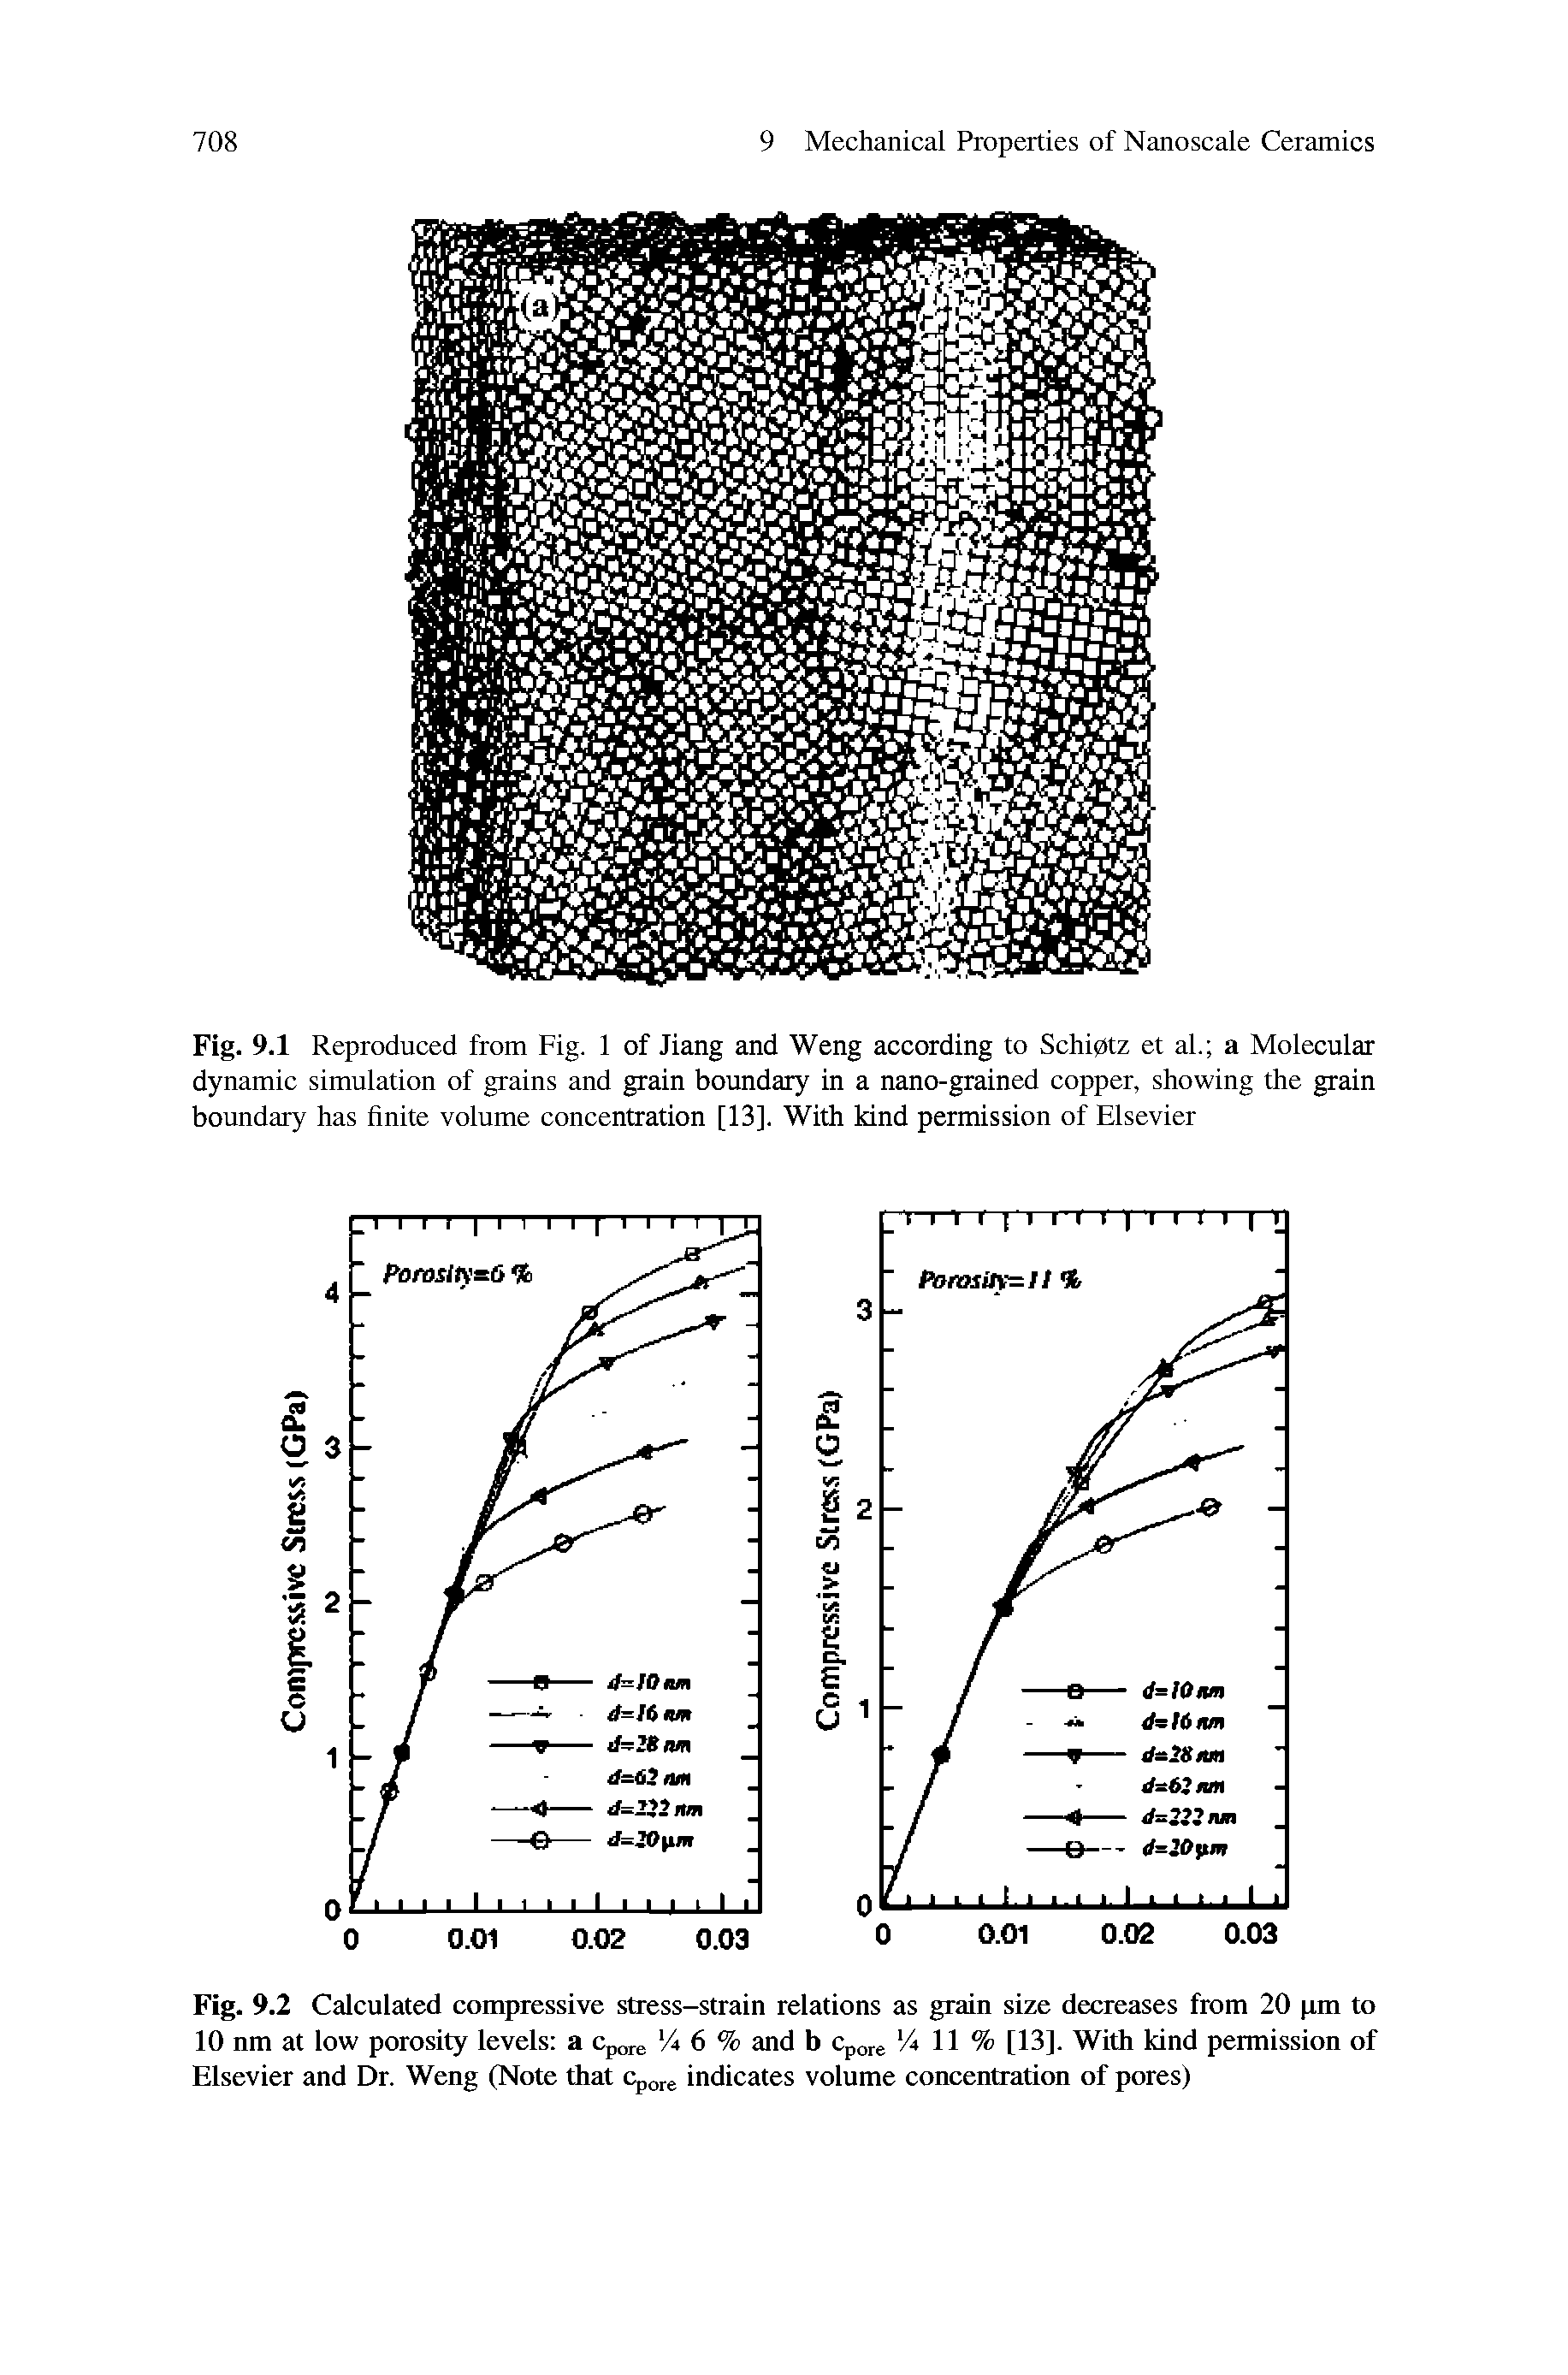 Fig. 9.2 Calculated compressive stress-strain relations as grain size decreases from 20 pm to 10 nm at low porosity levels a Cpore % 6 % and b Cpore % 11 % [13]. With kind permission of Elsevier and Dr. Weng (Note that Cpp e indicates volume concentration of pores)...